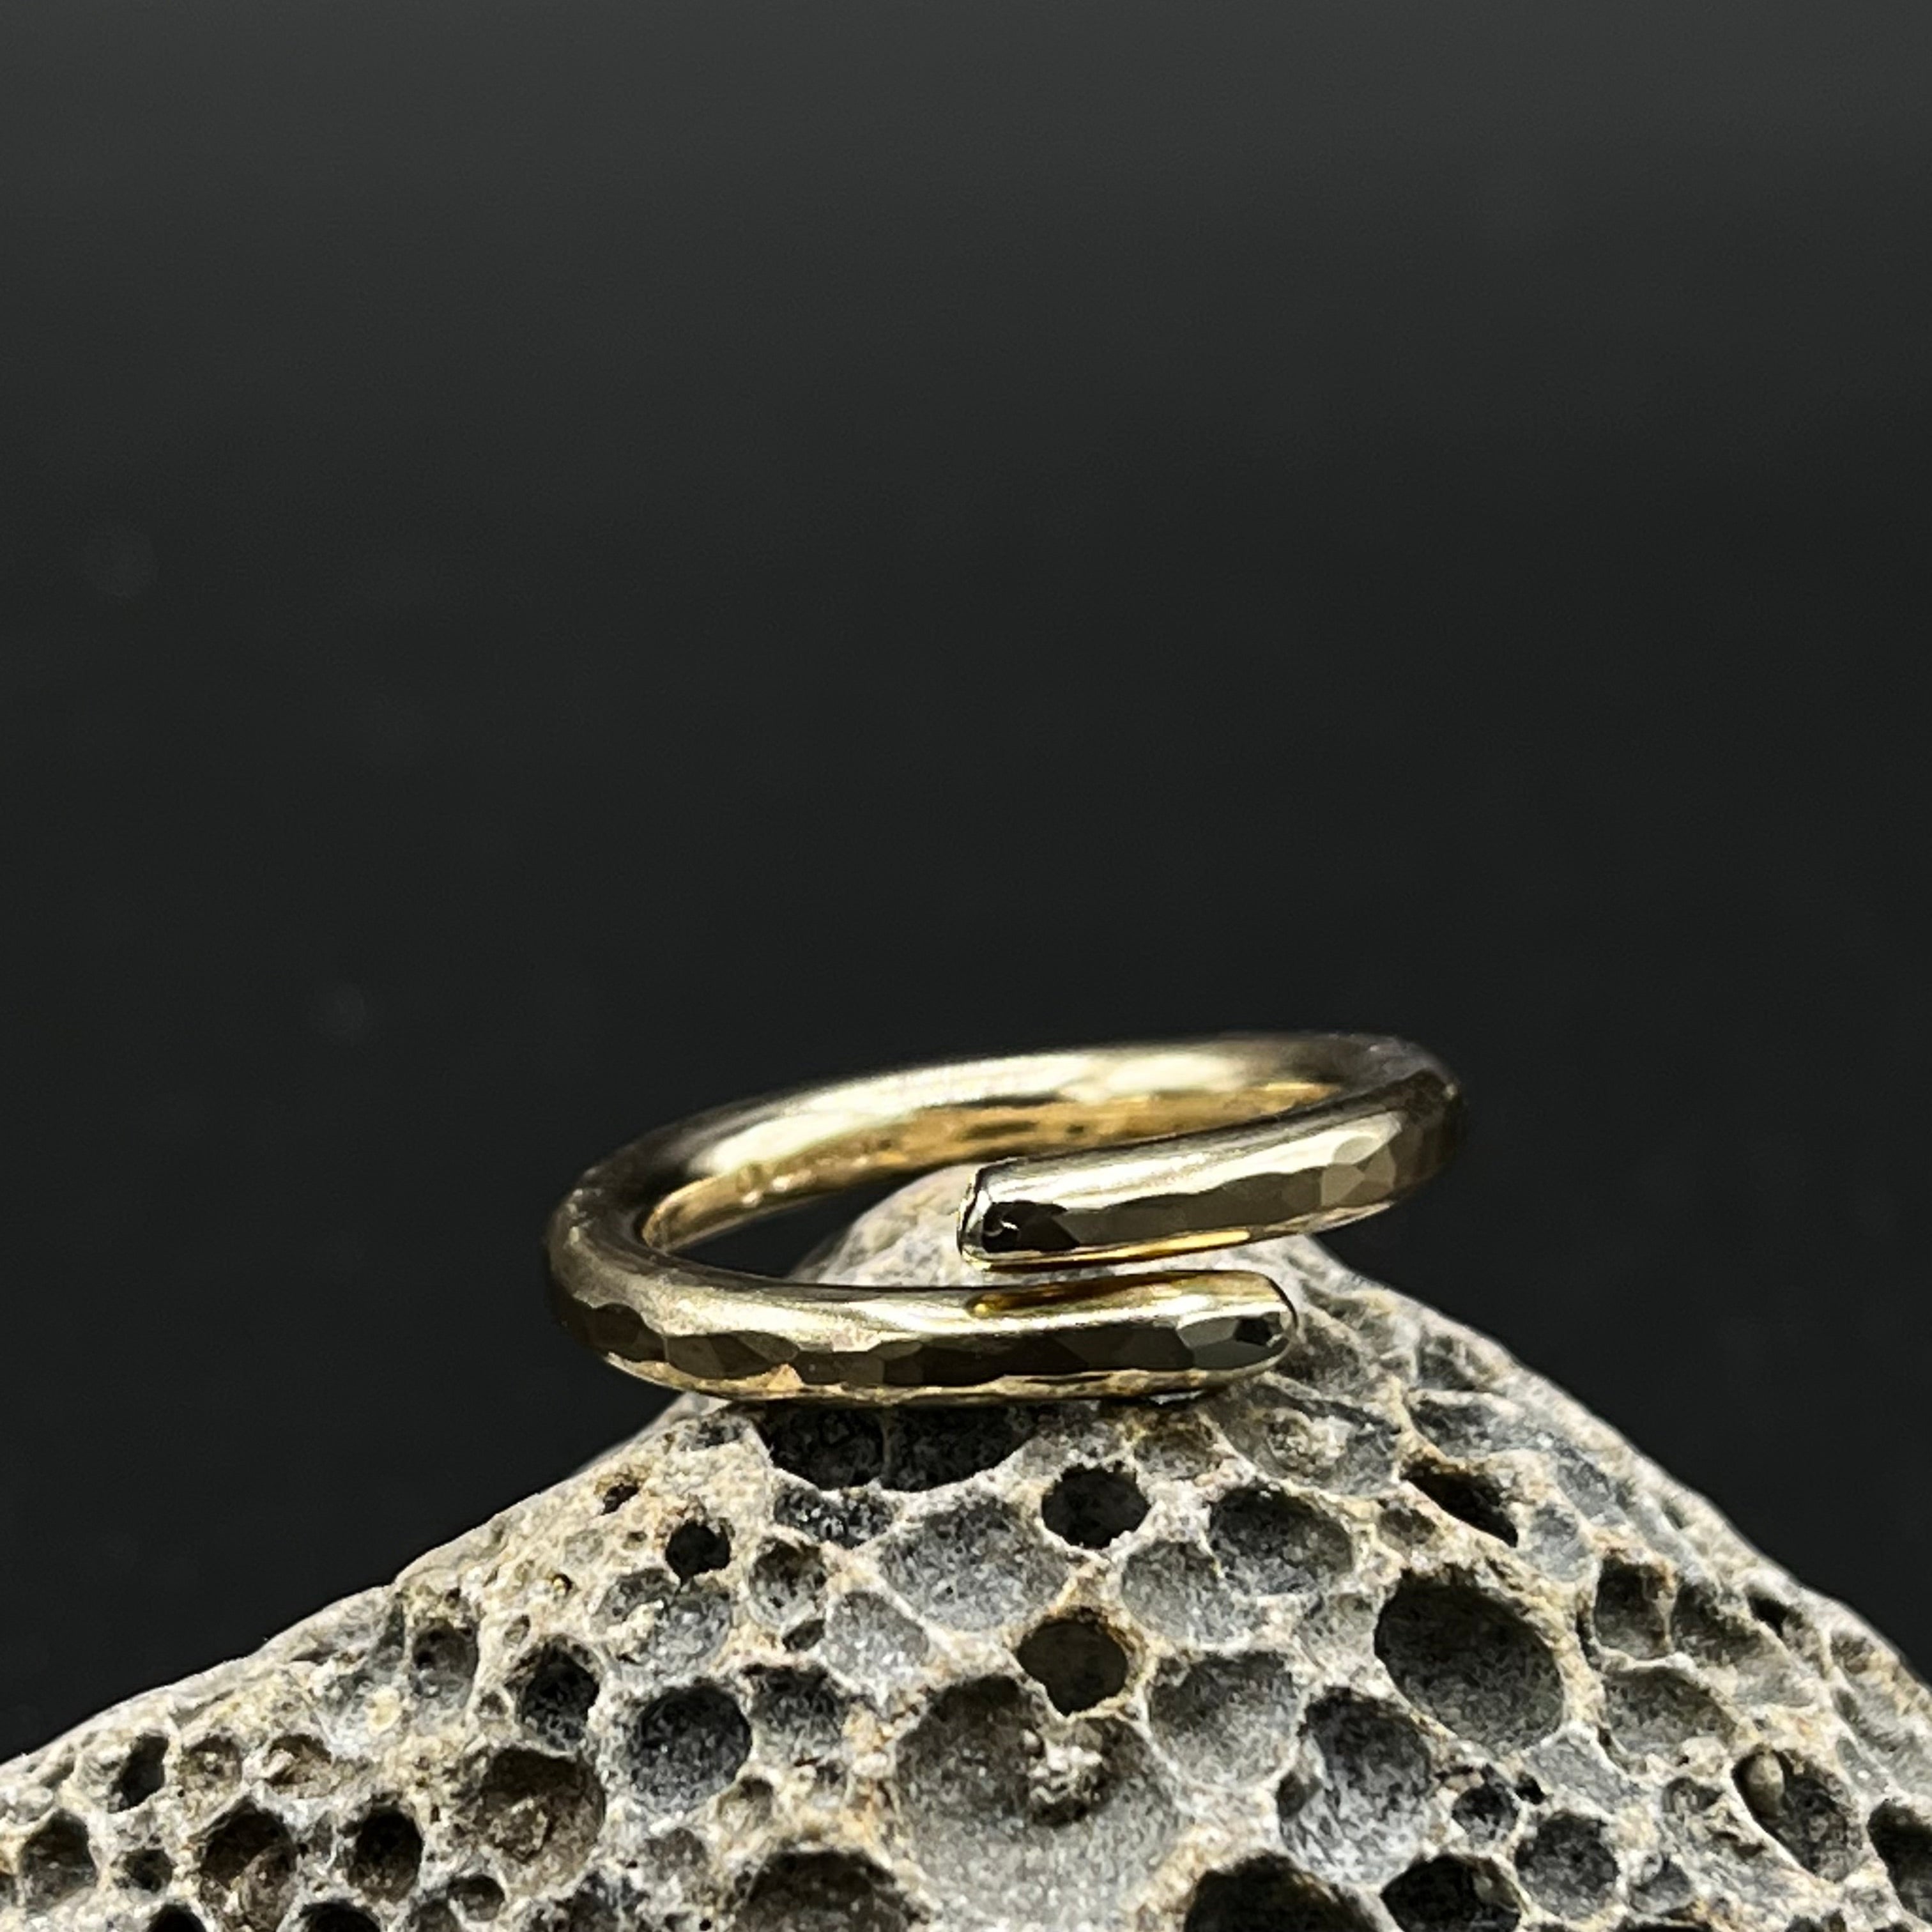 9ct yellow gold ring. Crossover, round wire hammered, polished finish.